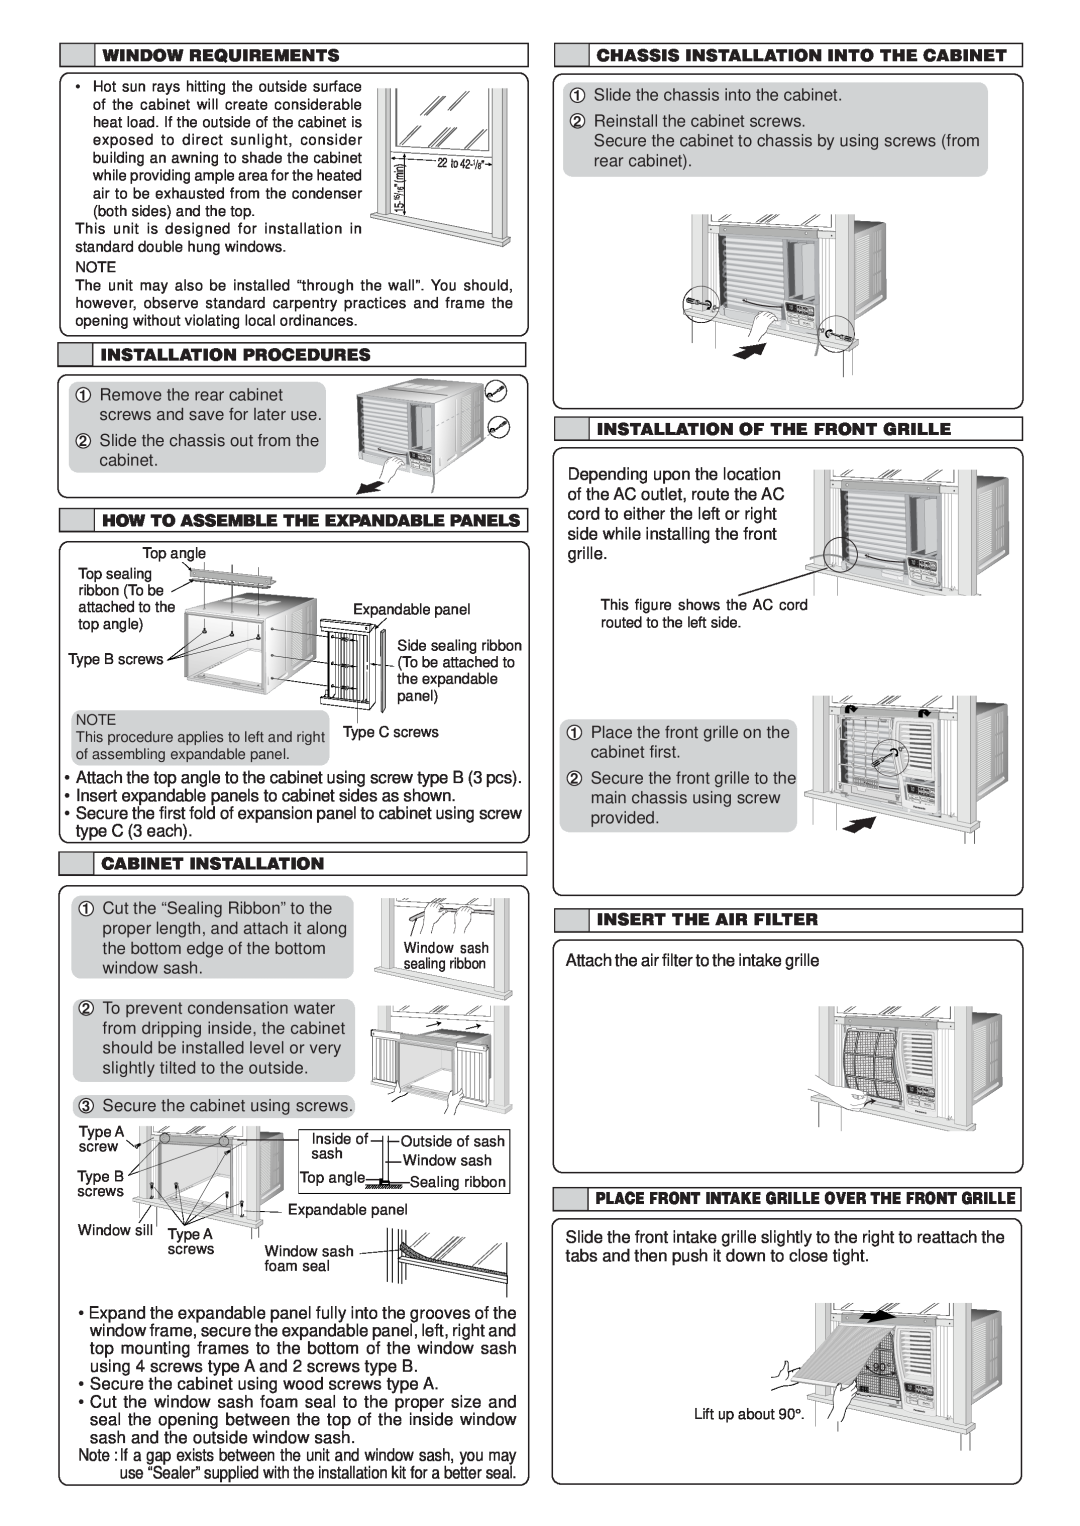 Panasonic CW-XC122VU manual Window Requirements, Chassis Installation Into The Cabinet, Installation Procedures 